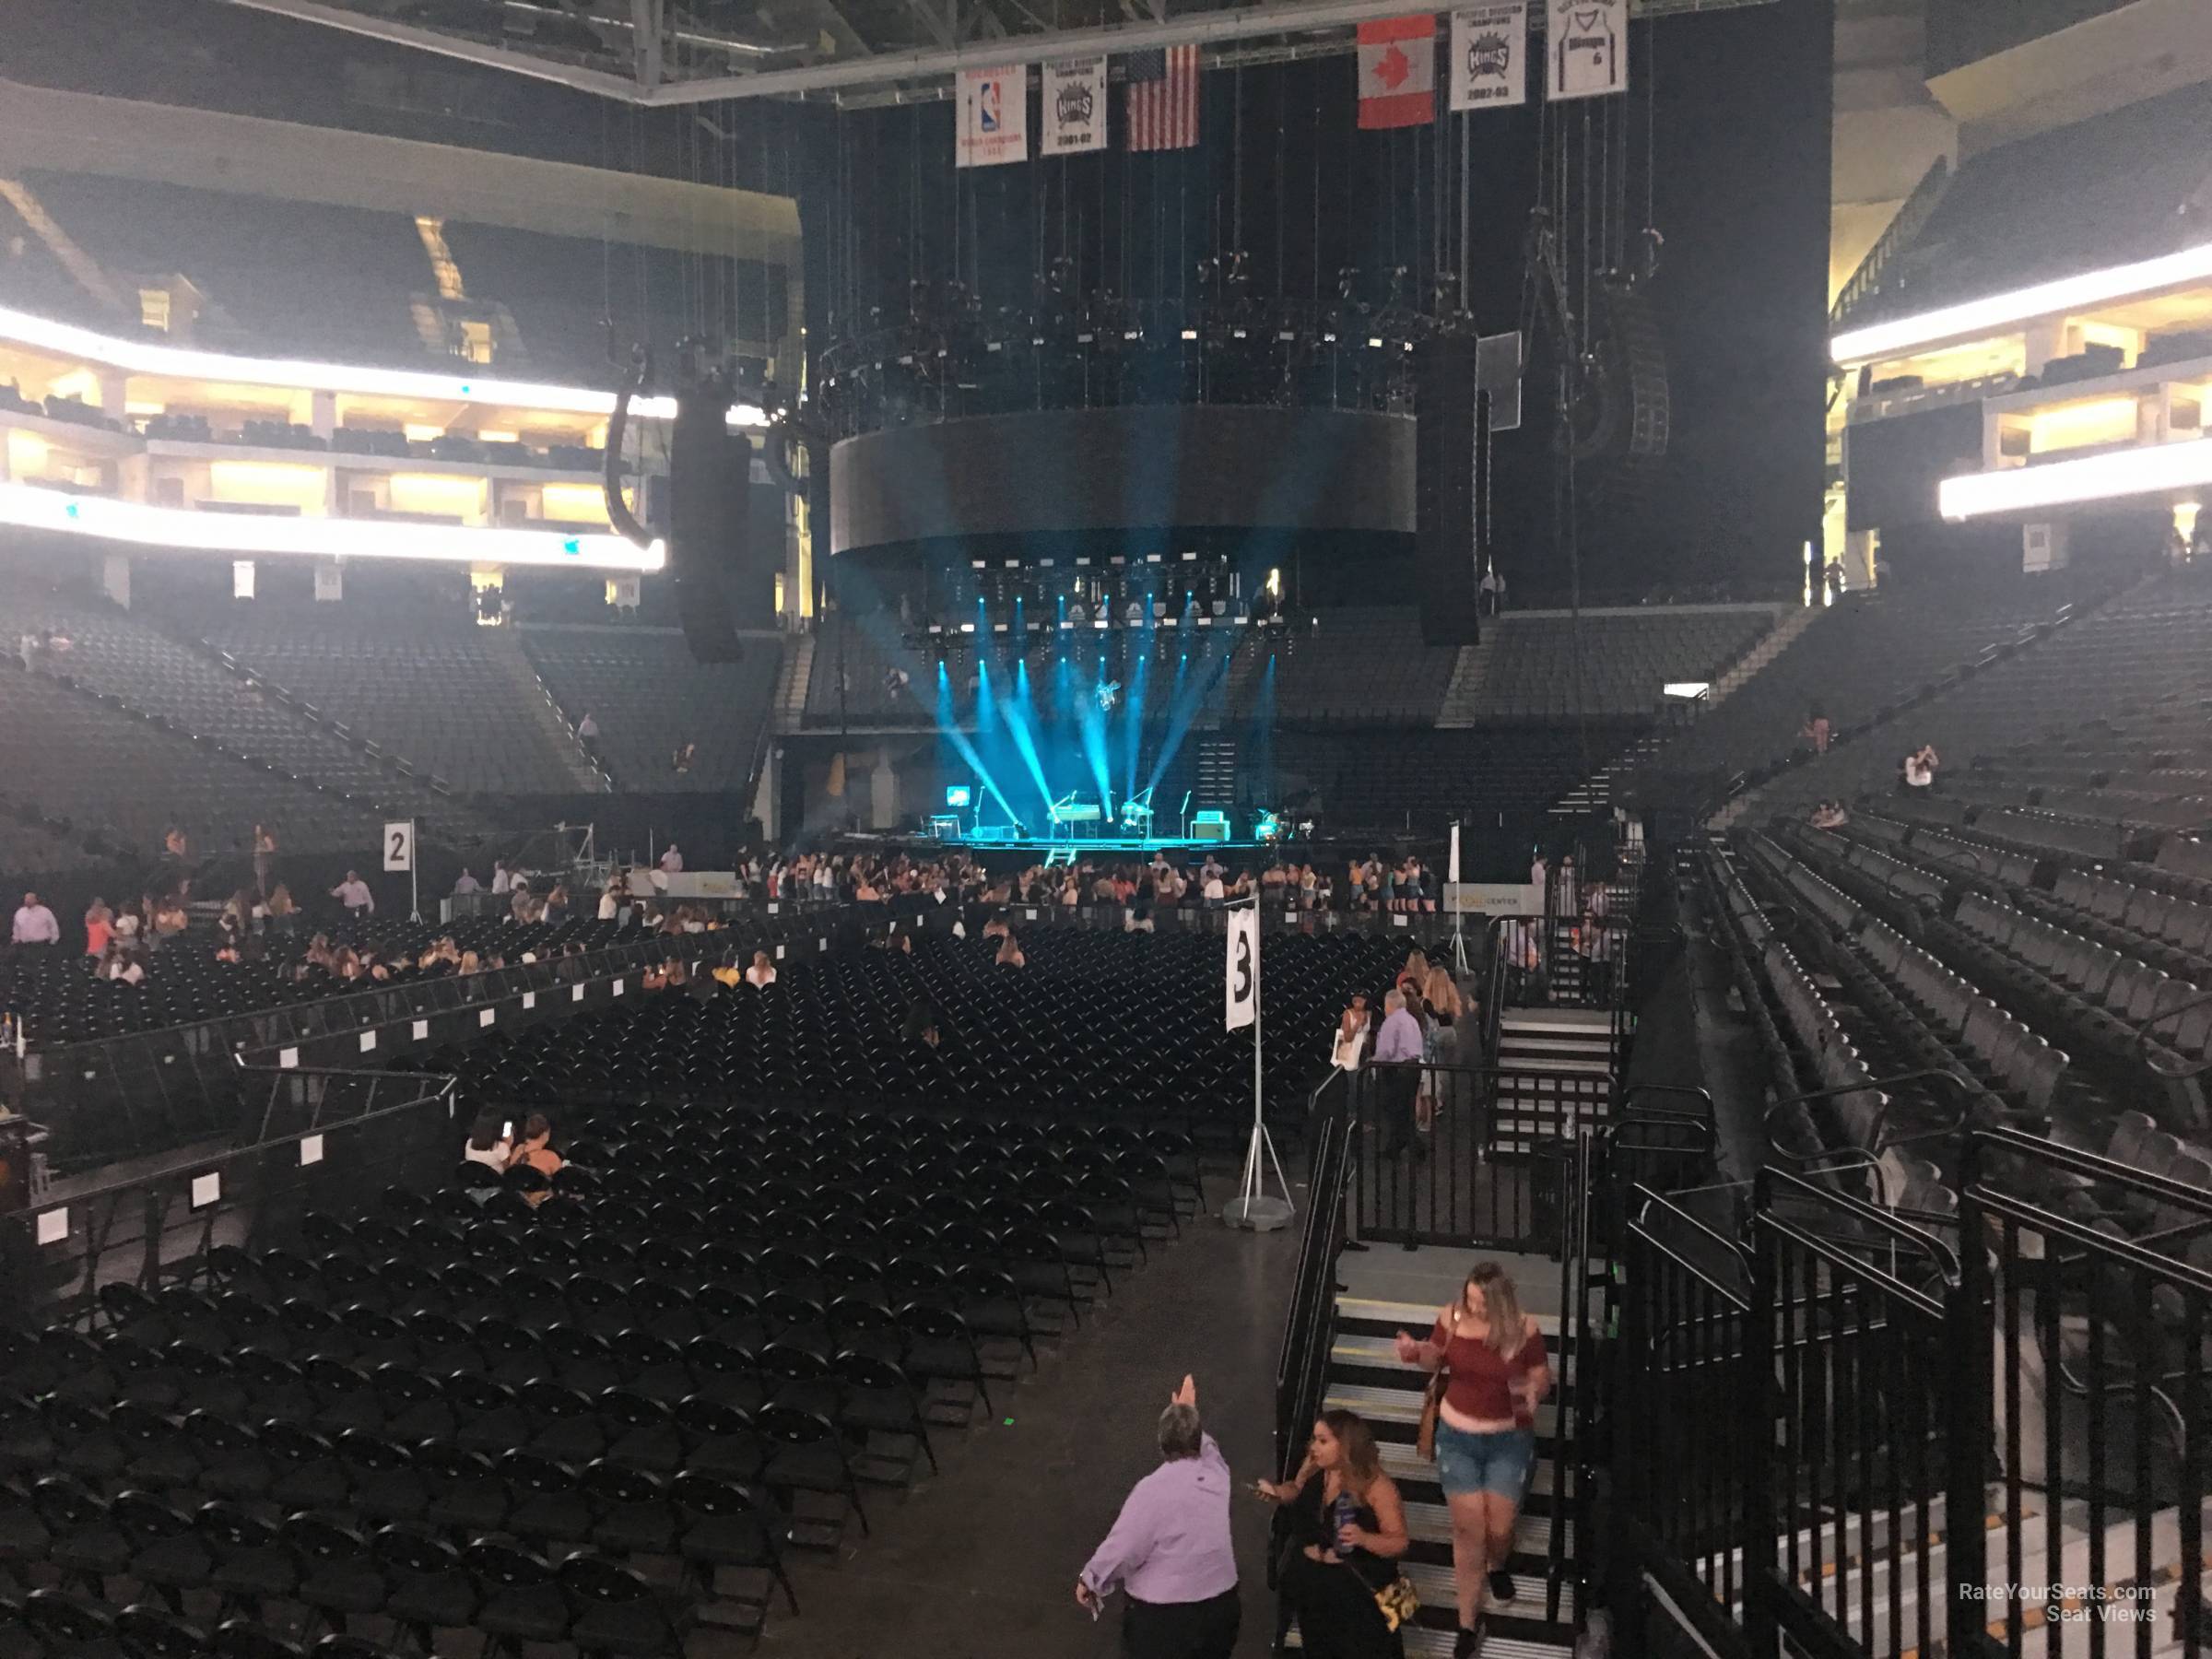 Section 111 at Golden 1 Center for Concerts